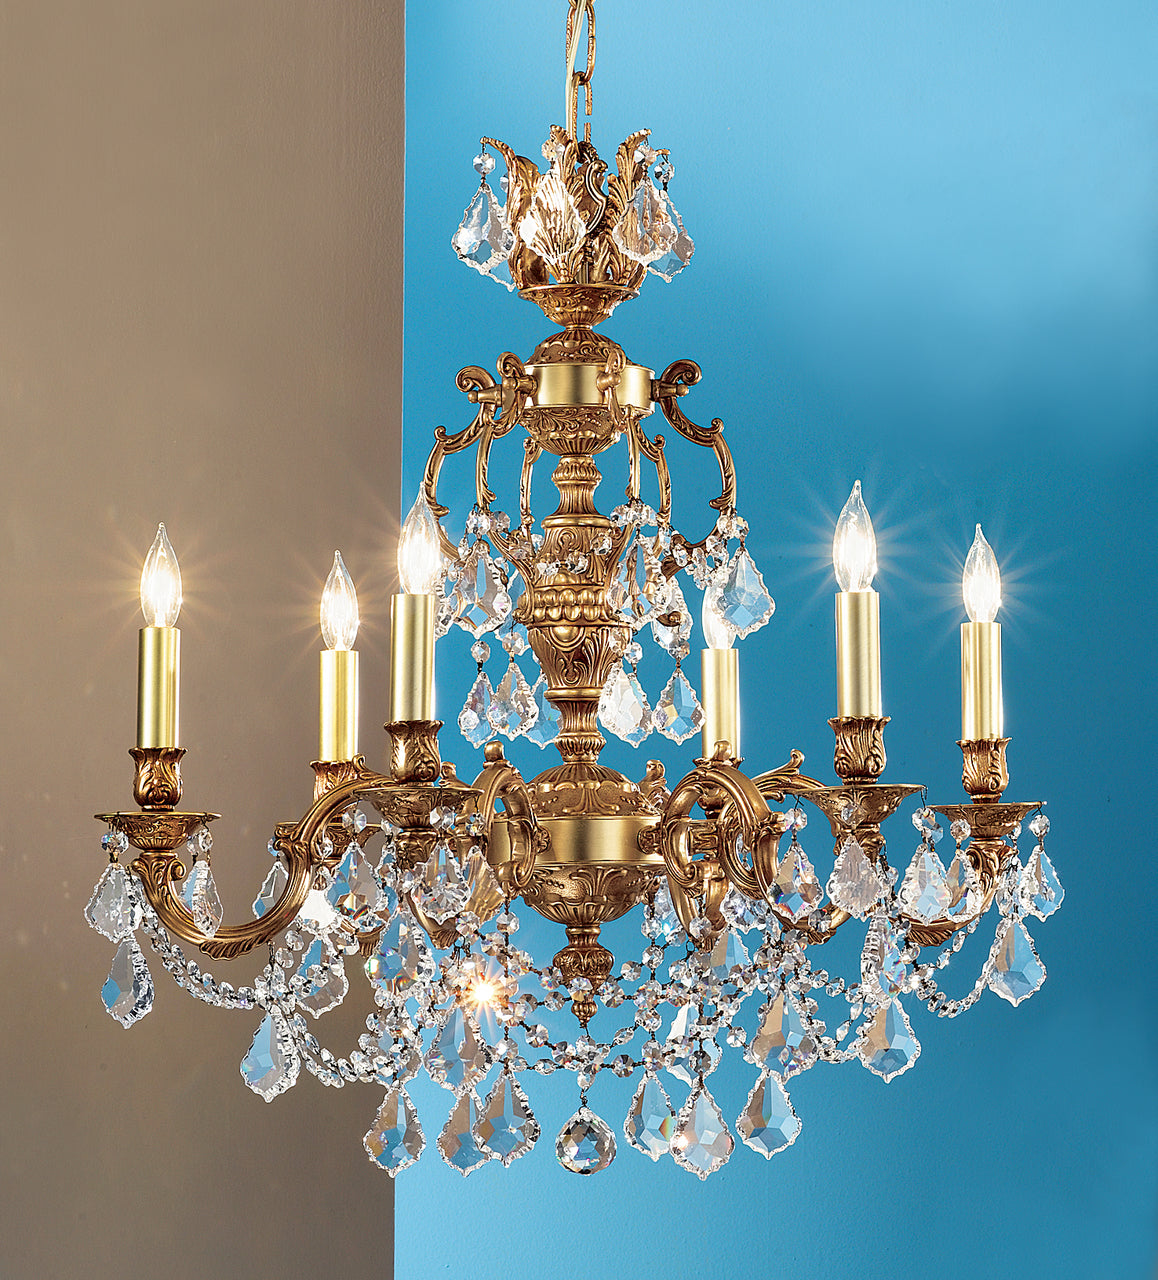 Classic Lighting 57386 FG SGT Chateau Imperial Crystal Chandelier in French Gold (Imported from Spain)